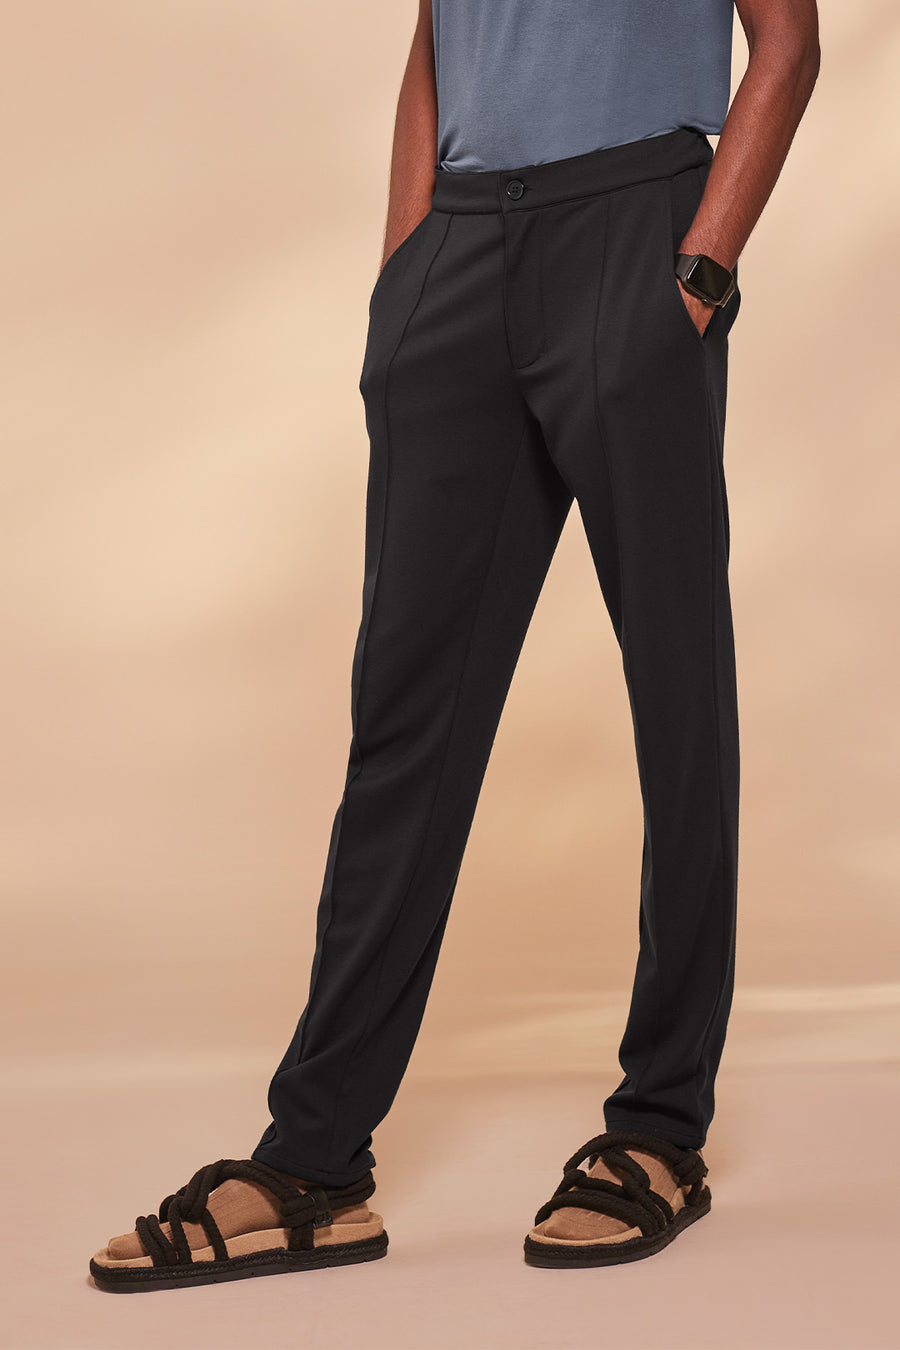 In & Out Hybrid Pant Black